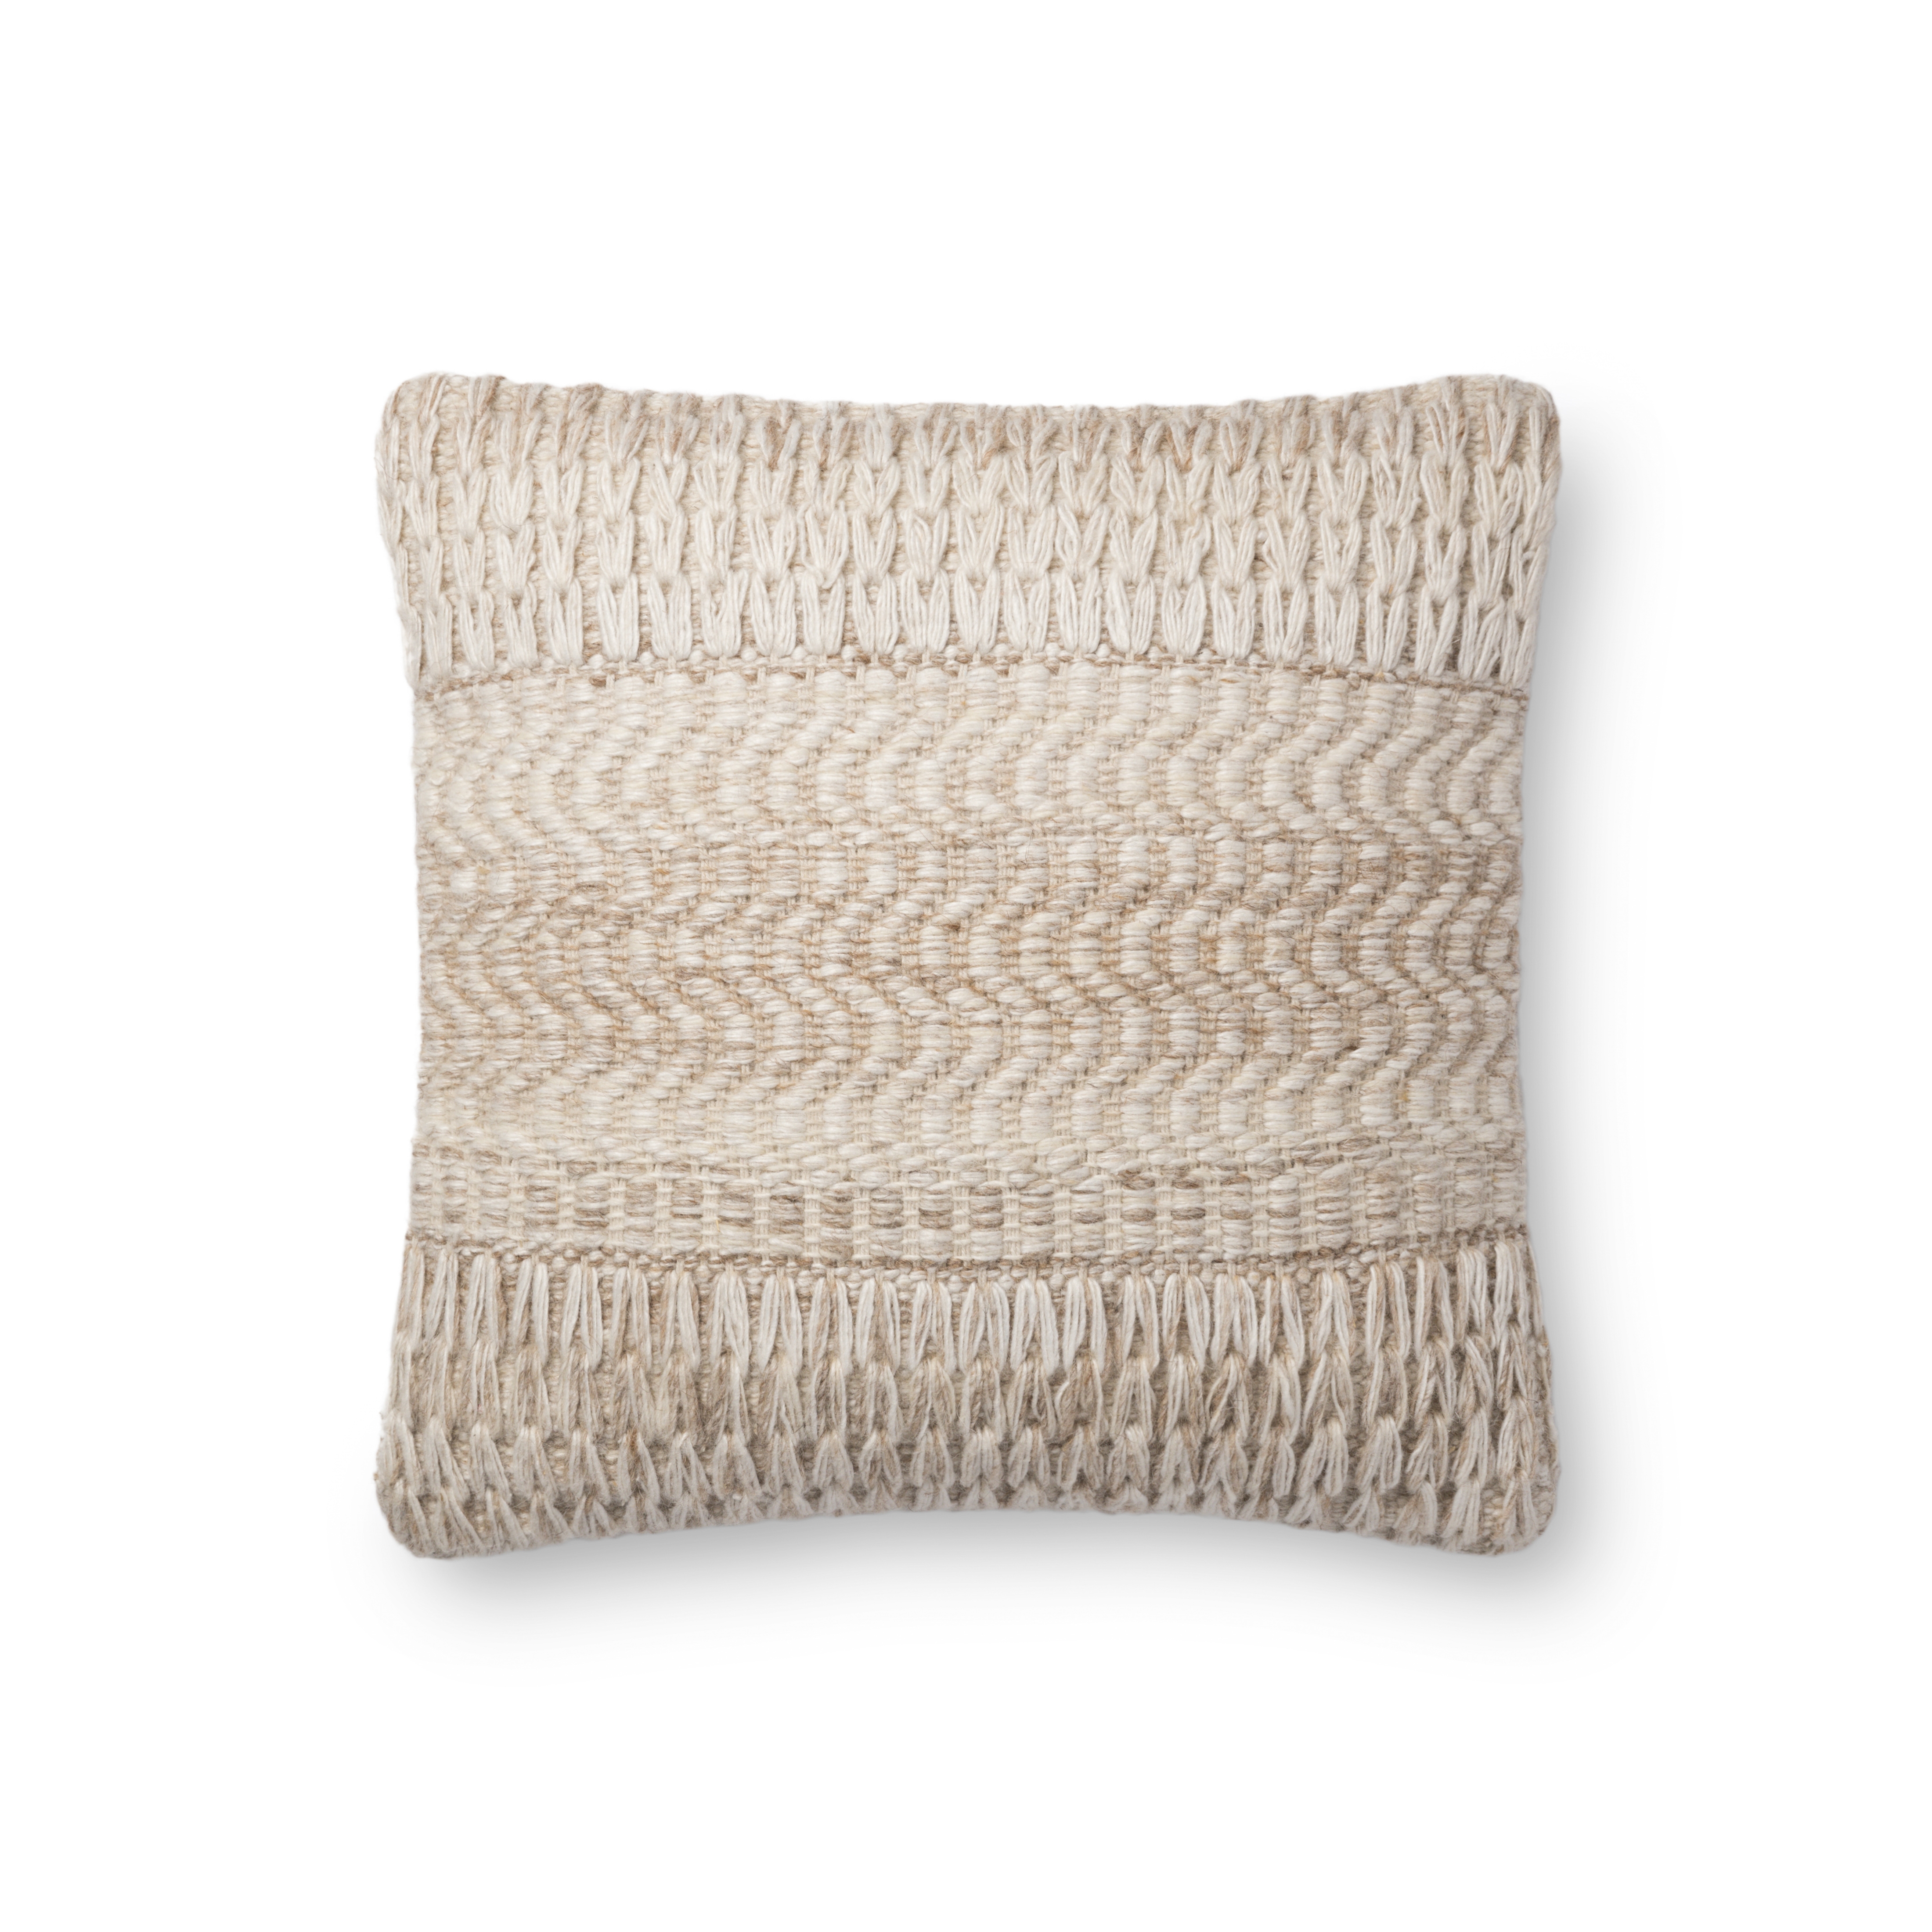 Loloi Pillows P0697 Sand 18" x 18" Cover Only - Image 0